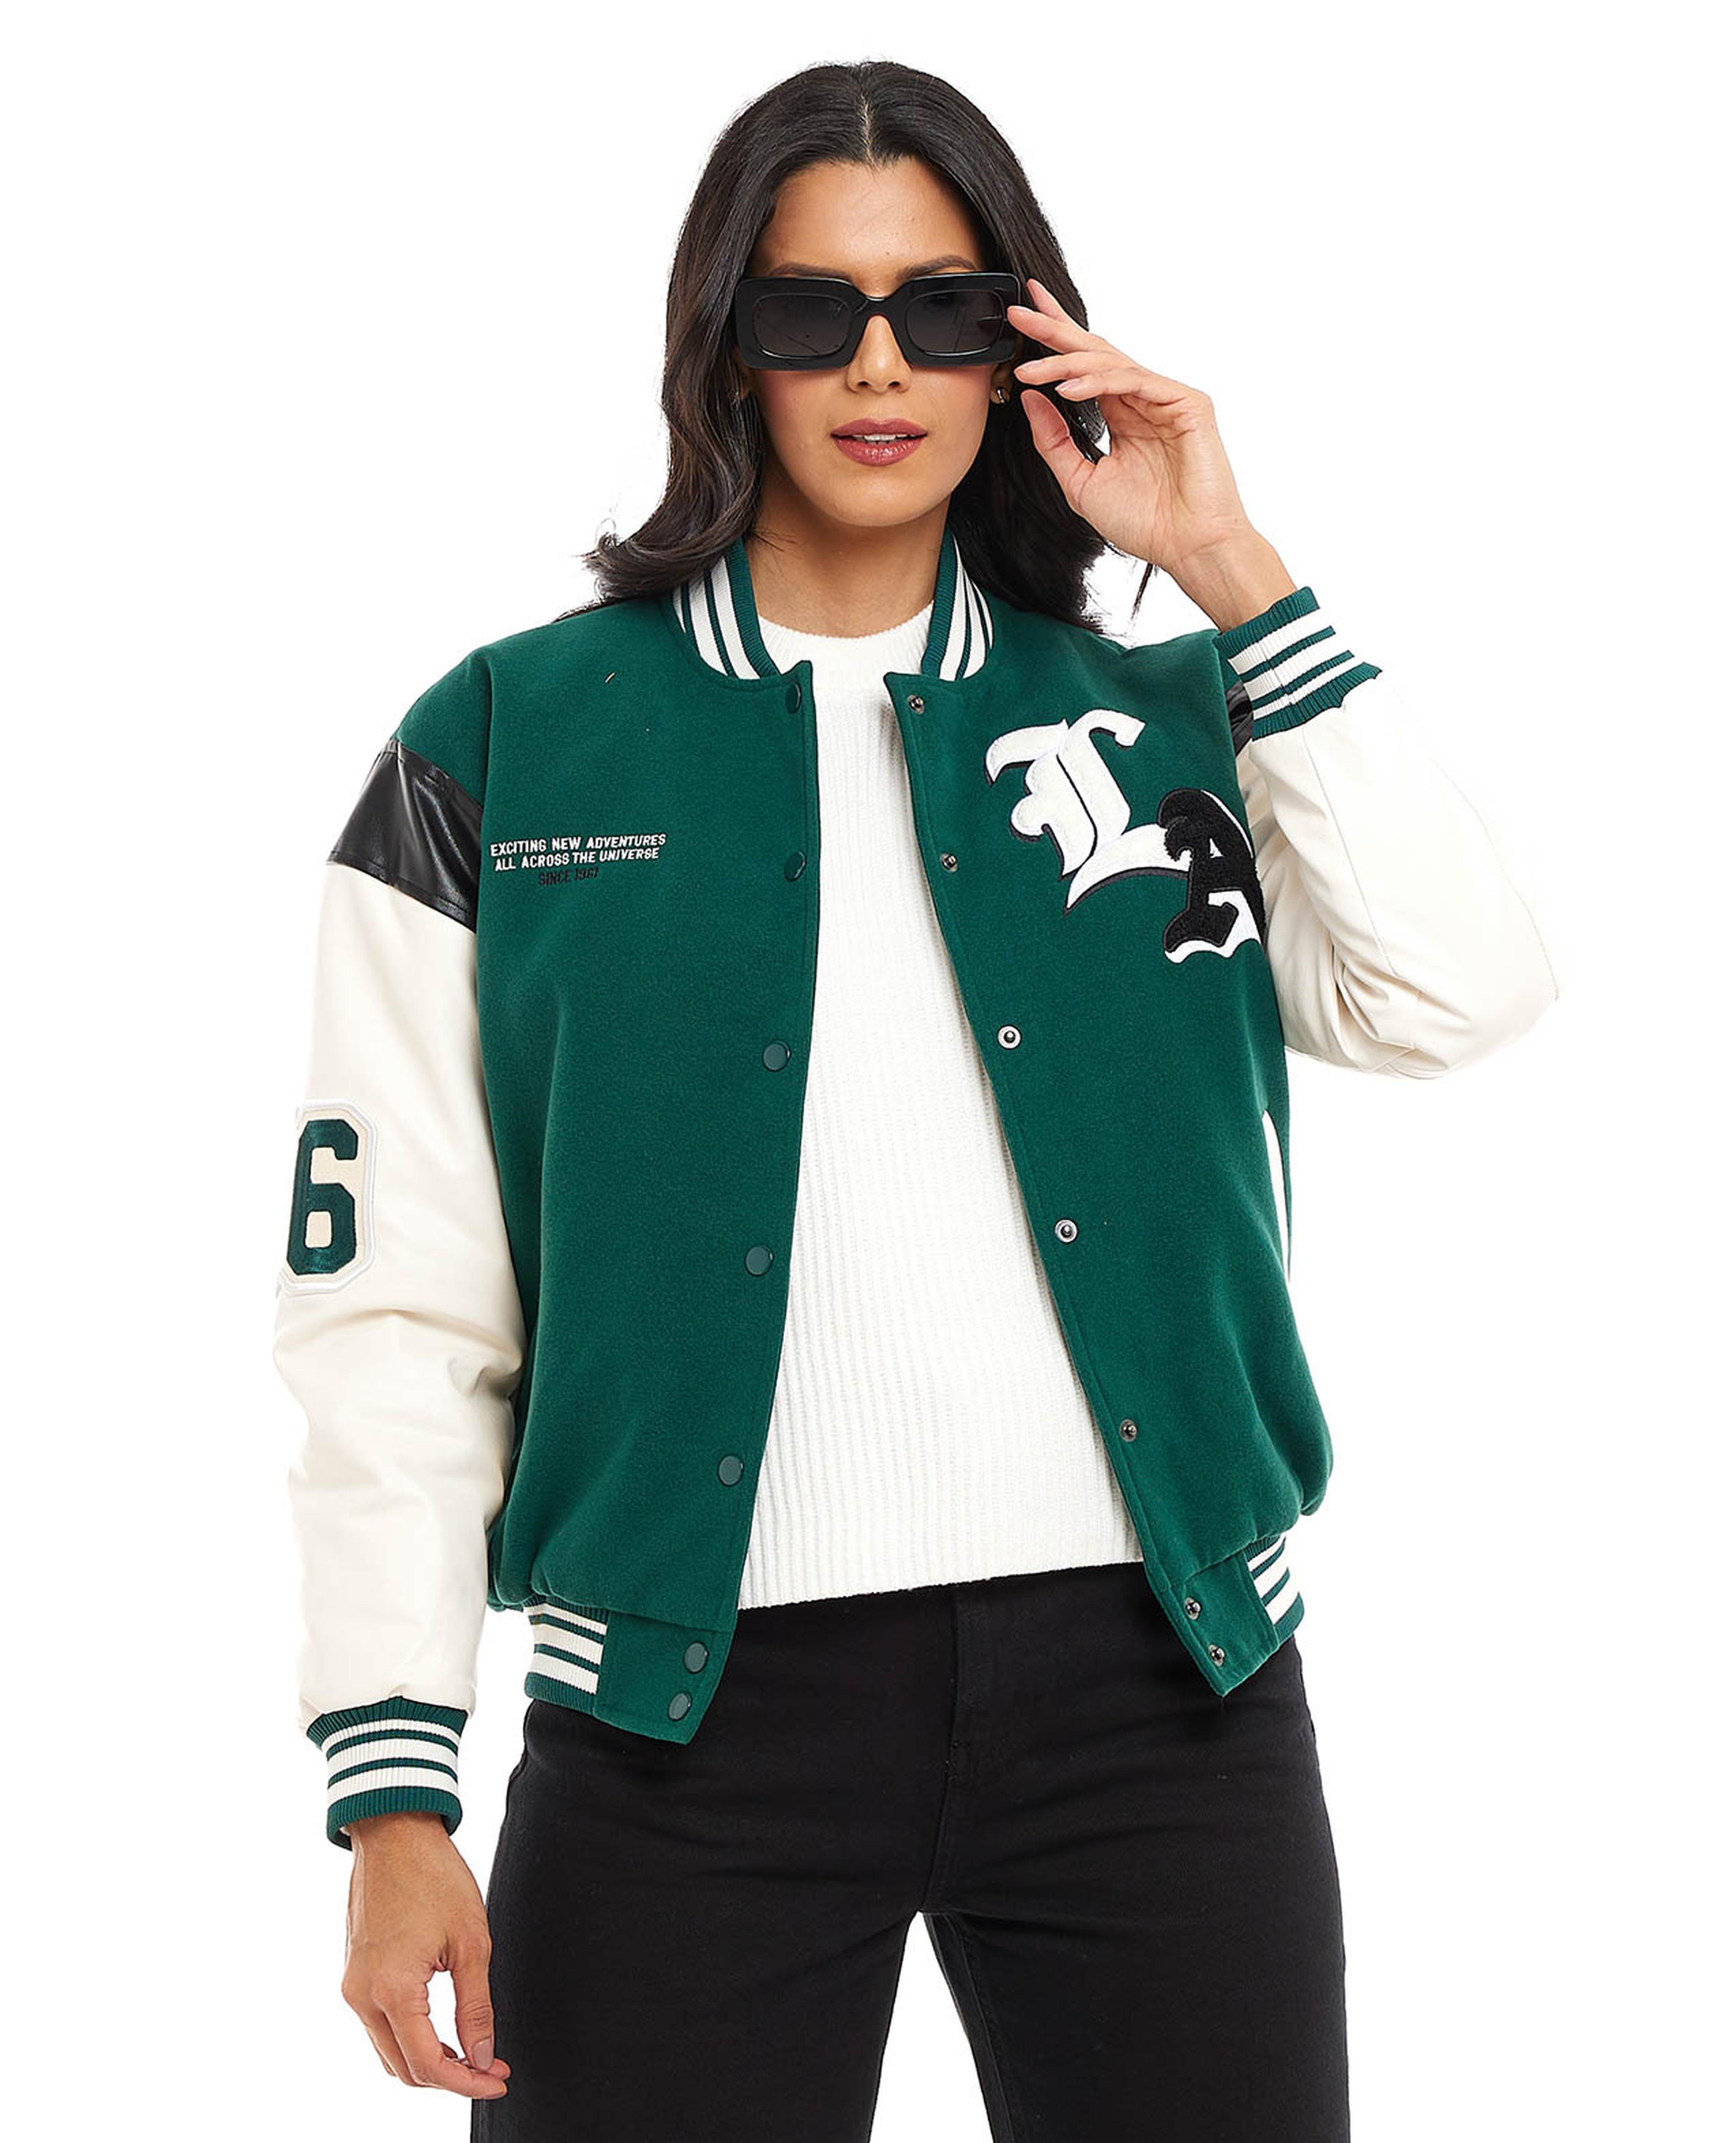 Applique Work Varsity Jacket with Snap Button Closure